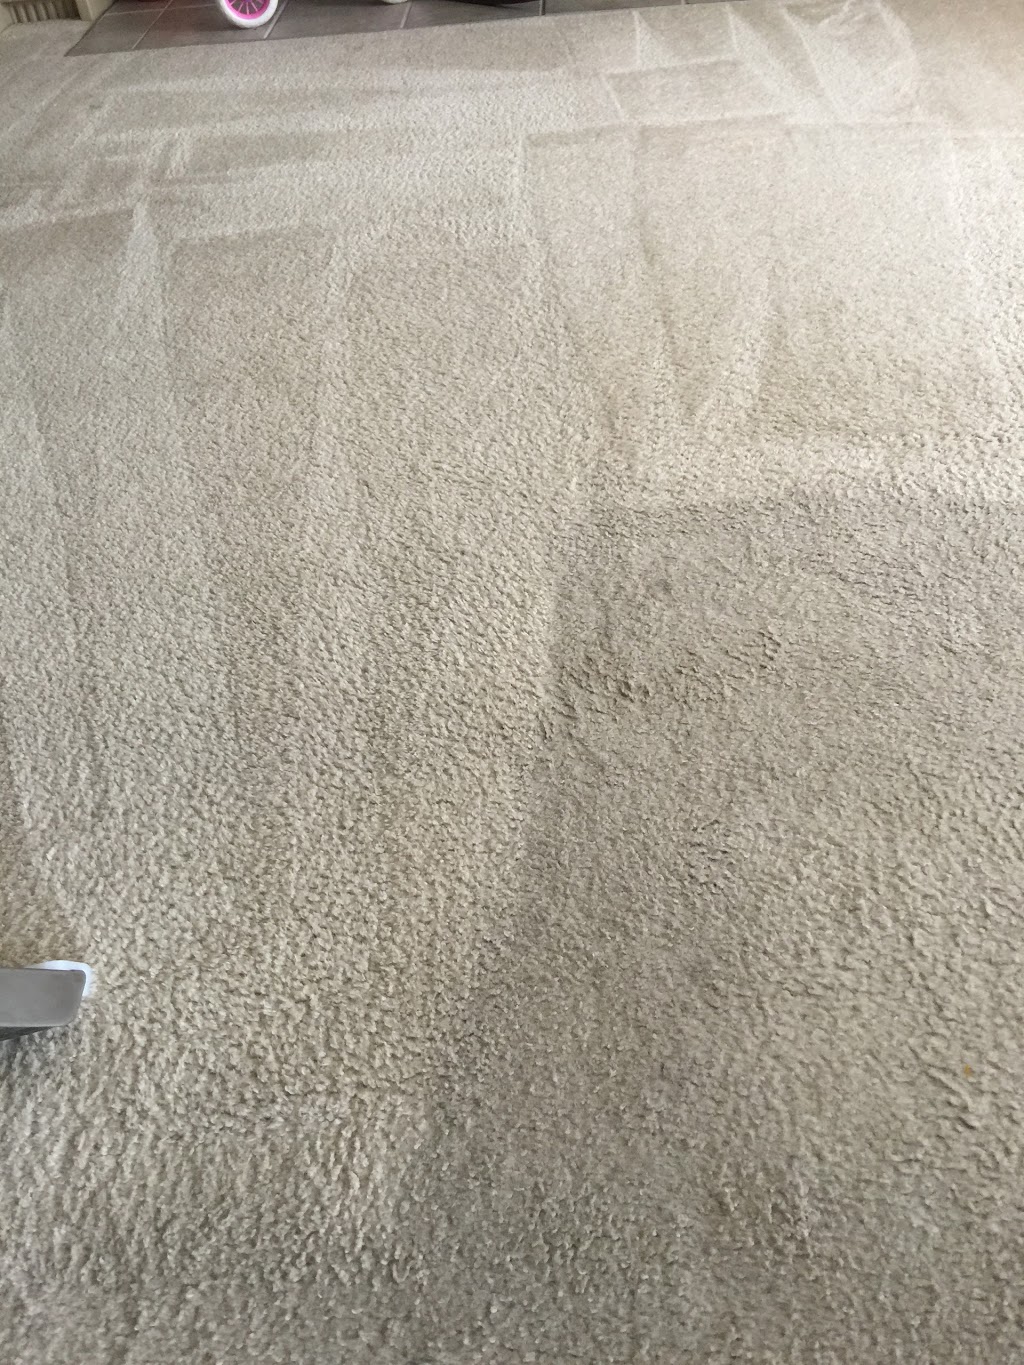 HI-TECH Carpet Cleaning and Restoration | 100 E Campus View Blvd #360, Columbus, OH 43235 | Phone: (614) 505-3573